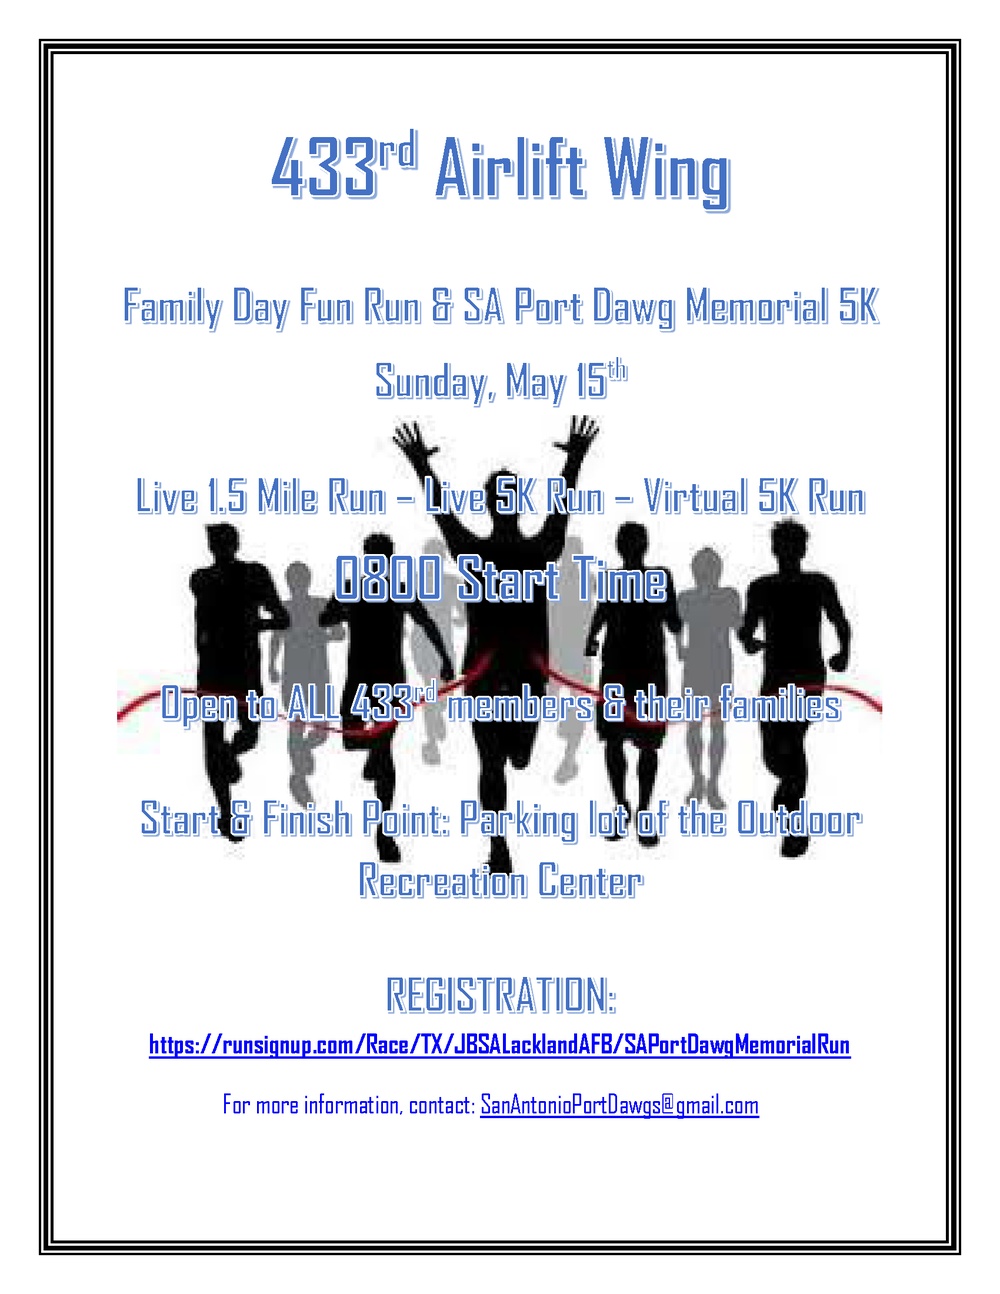 “Family Day” returns to the Alamo Wing